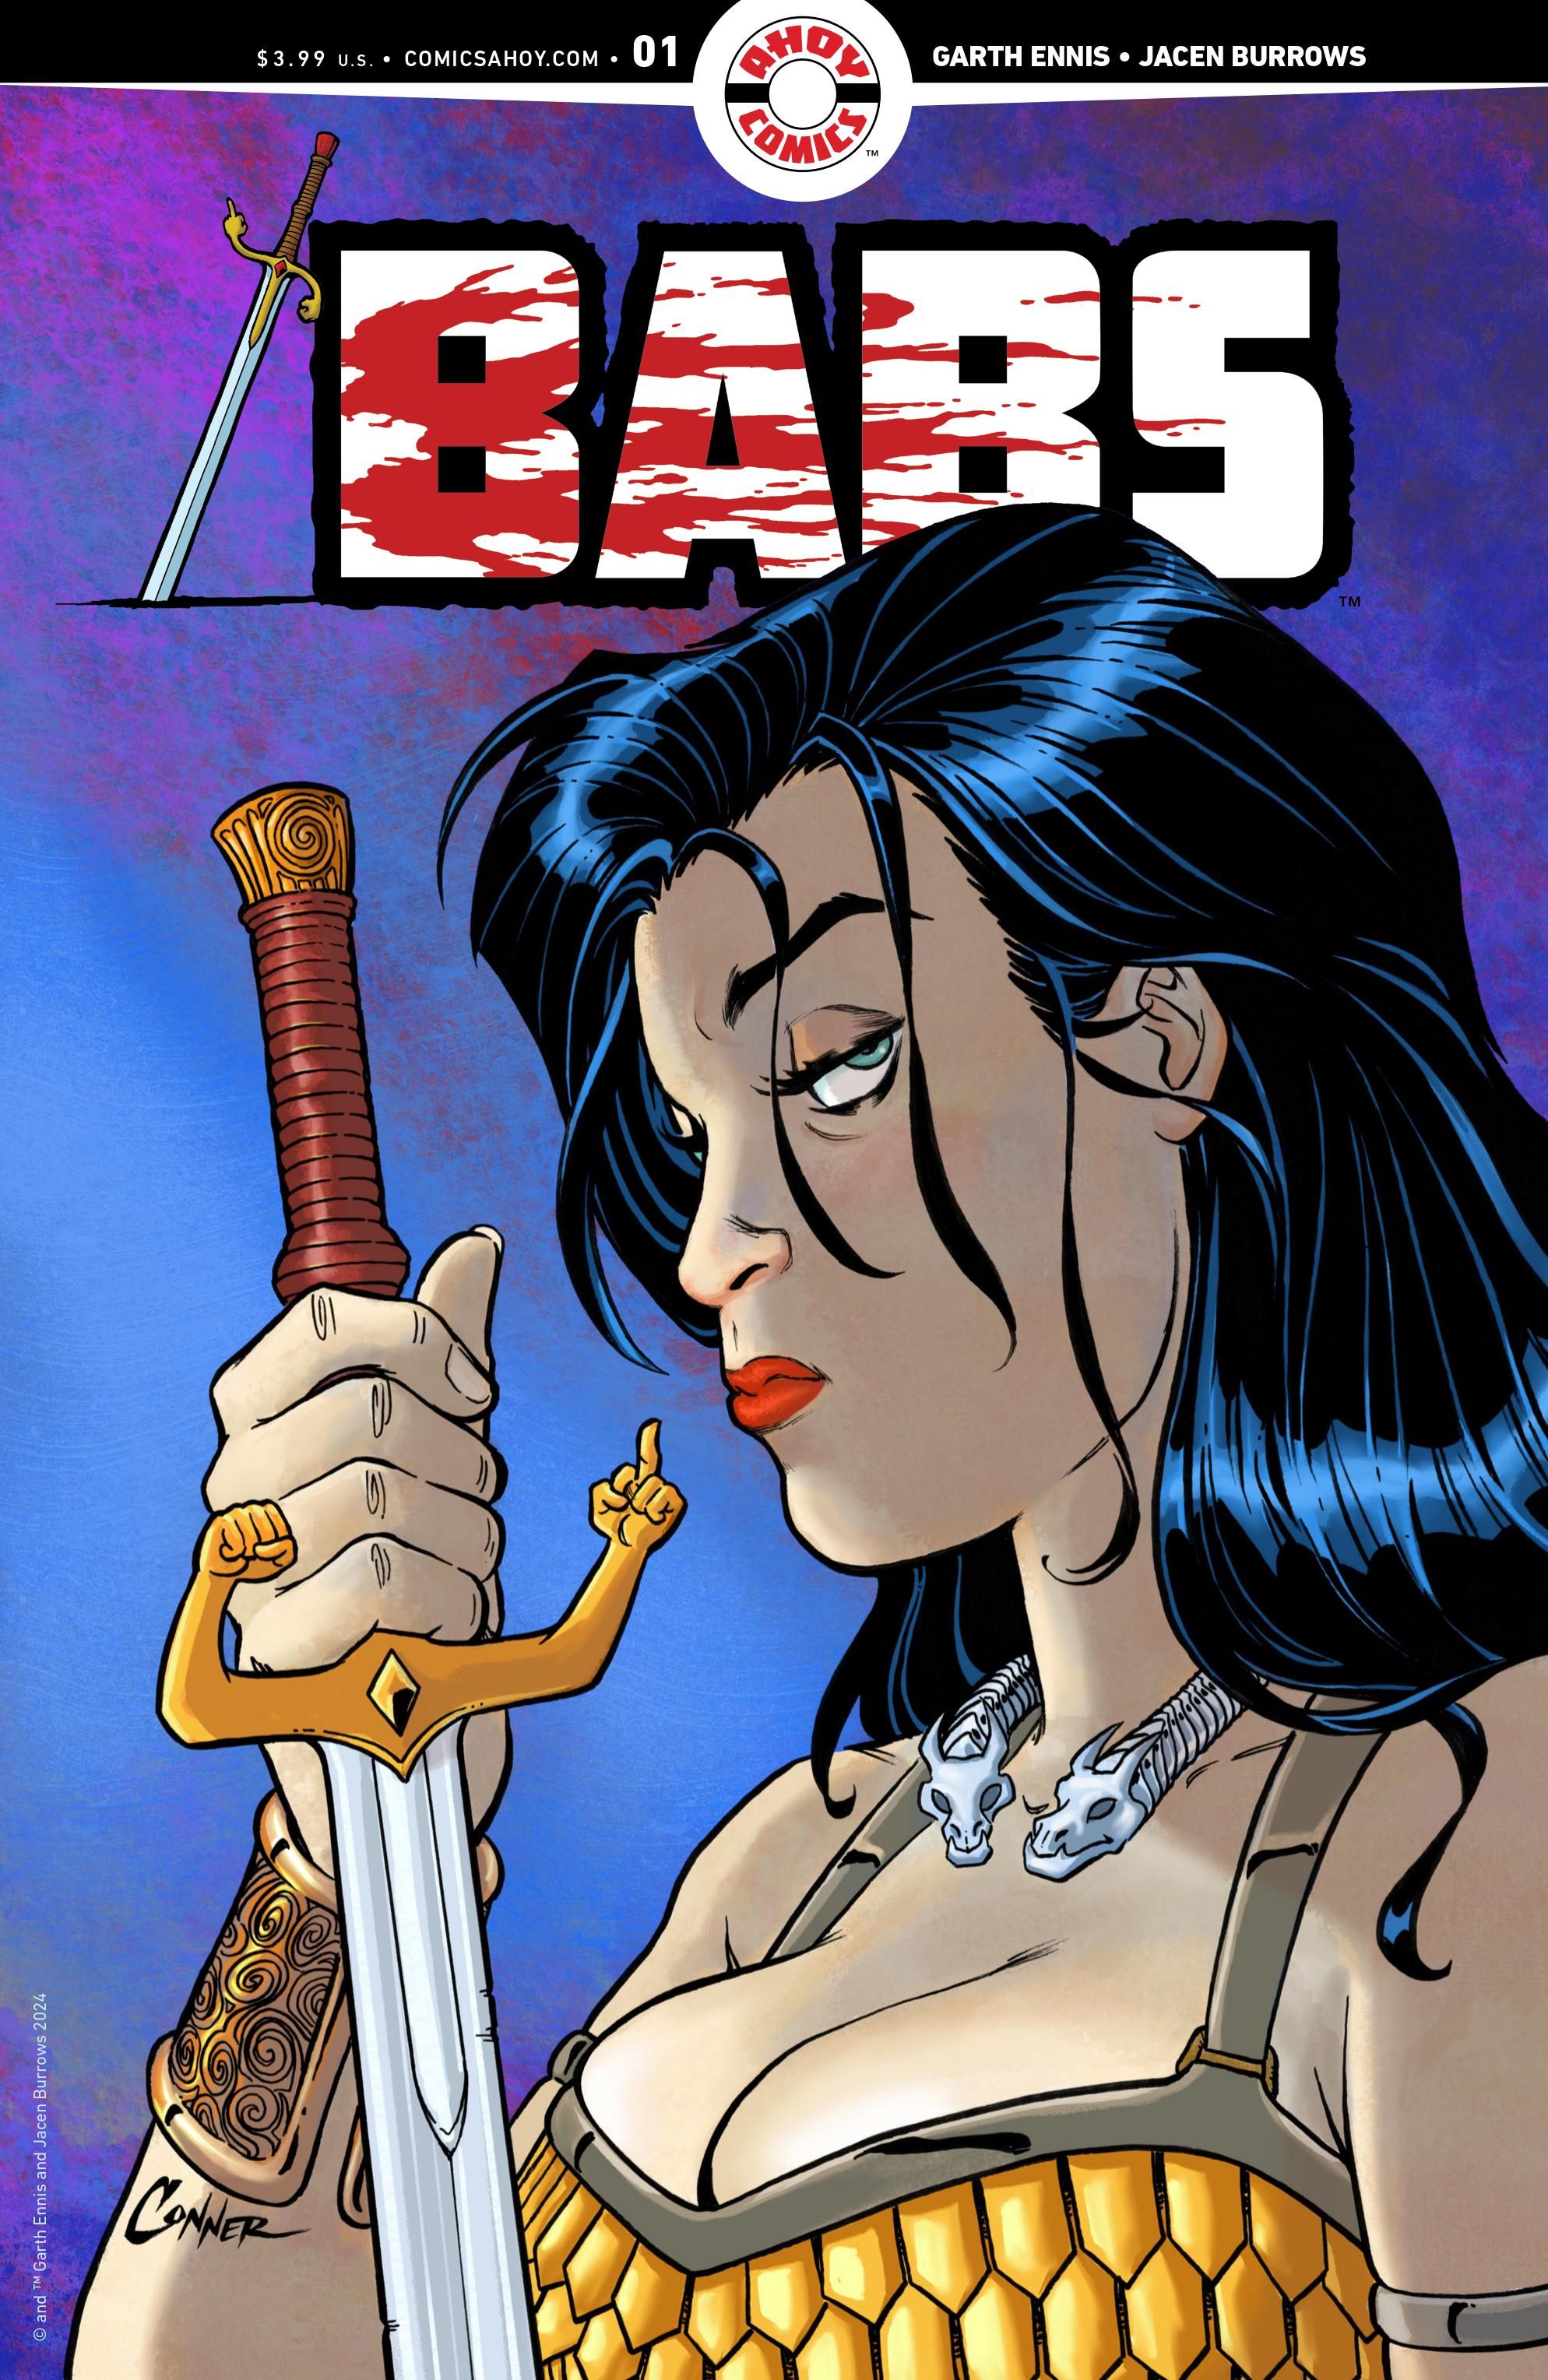 Variant cover for Garth Ennis' series BABS, featuring the protagonist holding a sword